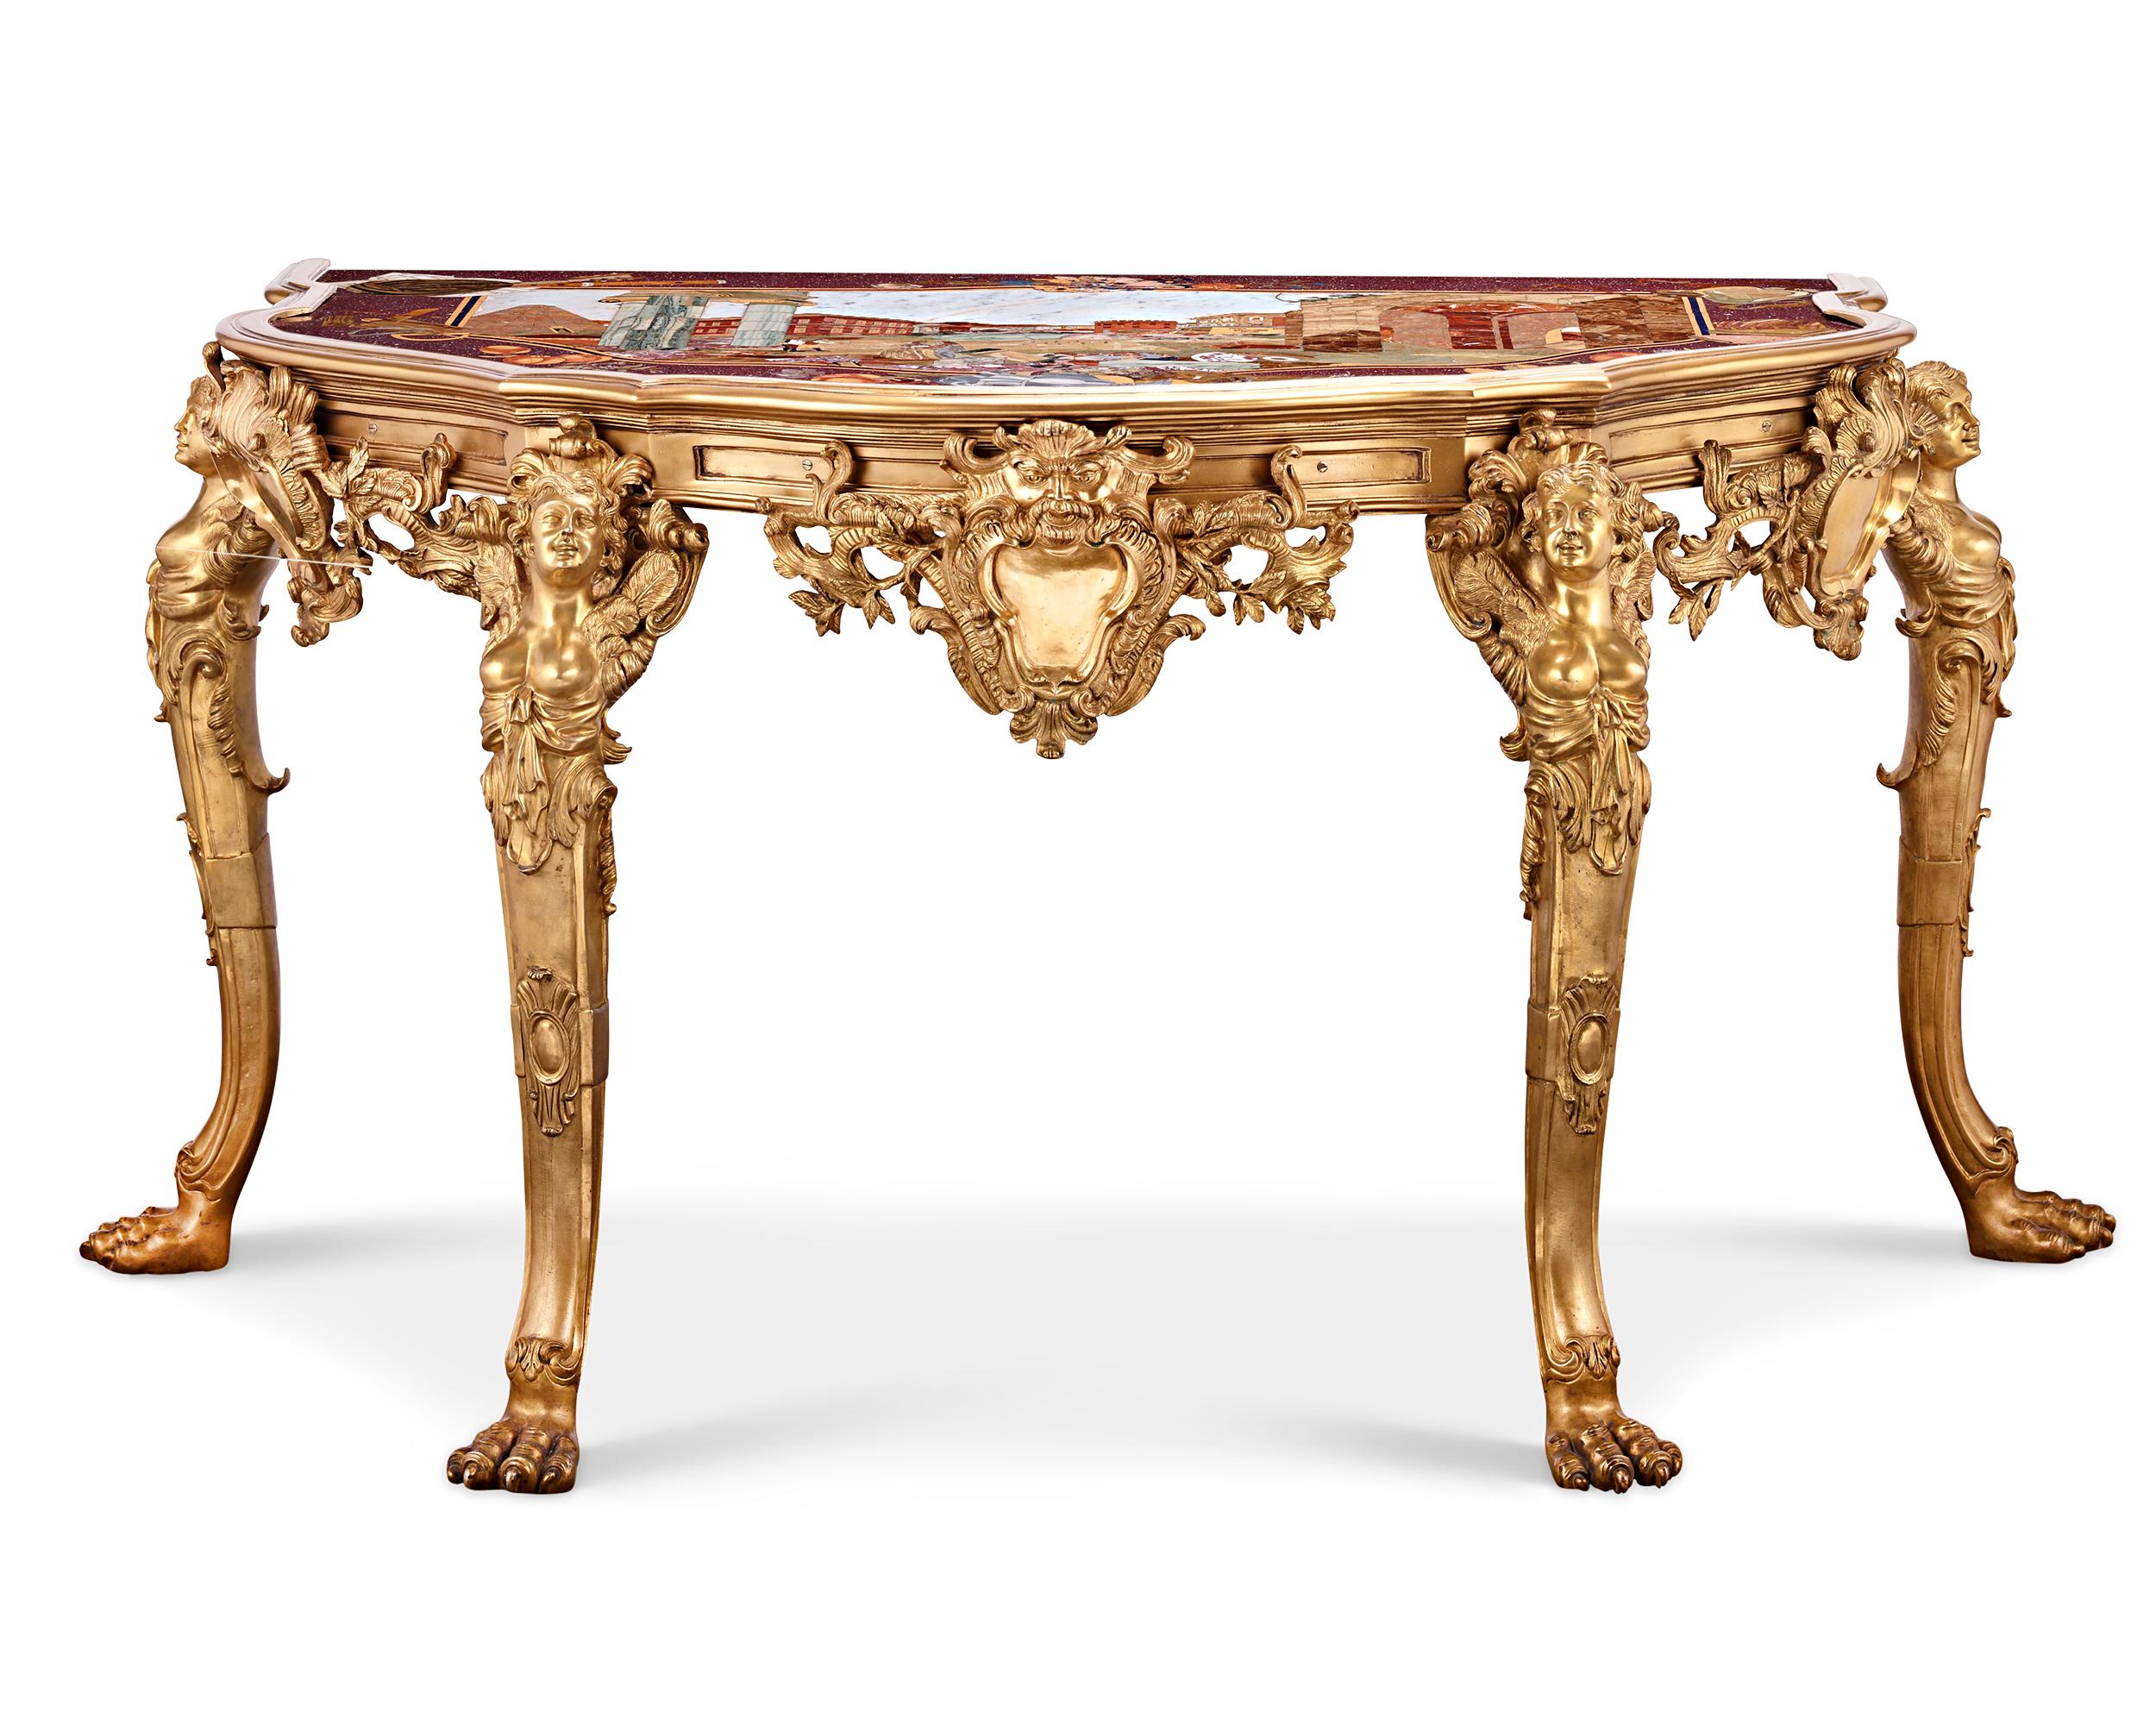 This incredible pair of pietre dure console tables can be counted among the most impressive pieces of hardstone artistry in the world. The tables closely resemble nine of the most famous pietre dure tables ever made — those created for Spain’s King